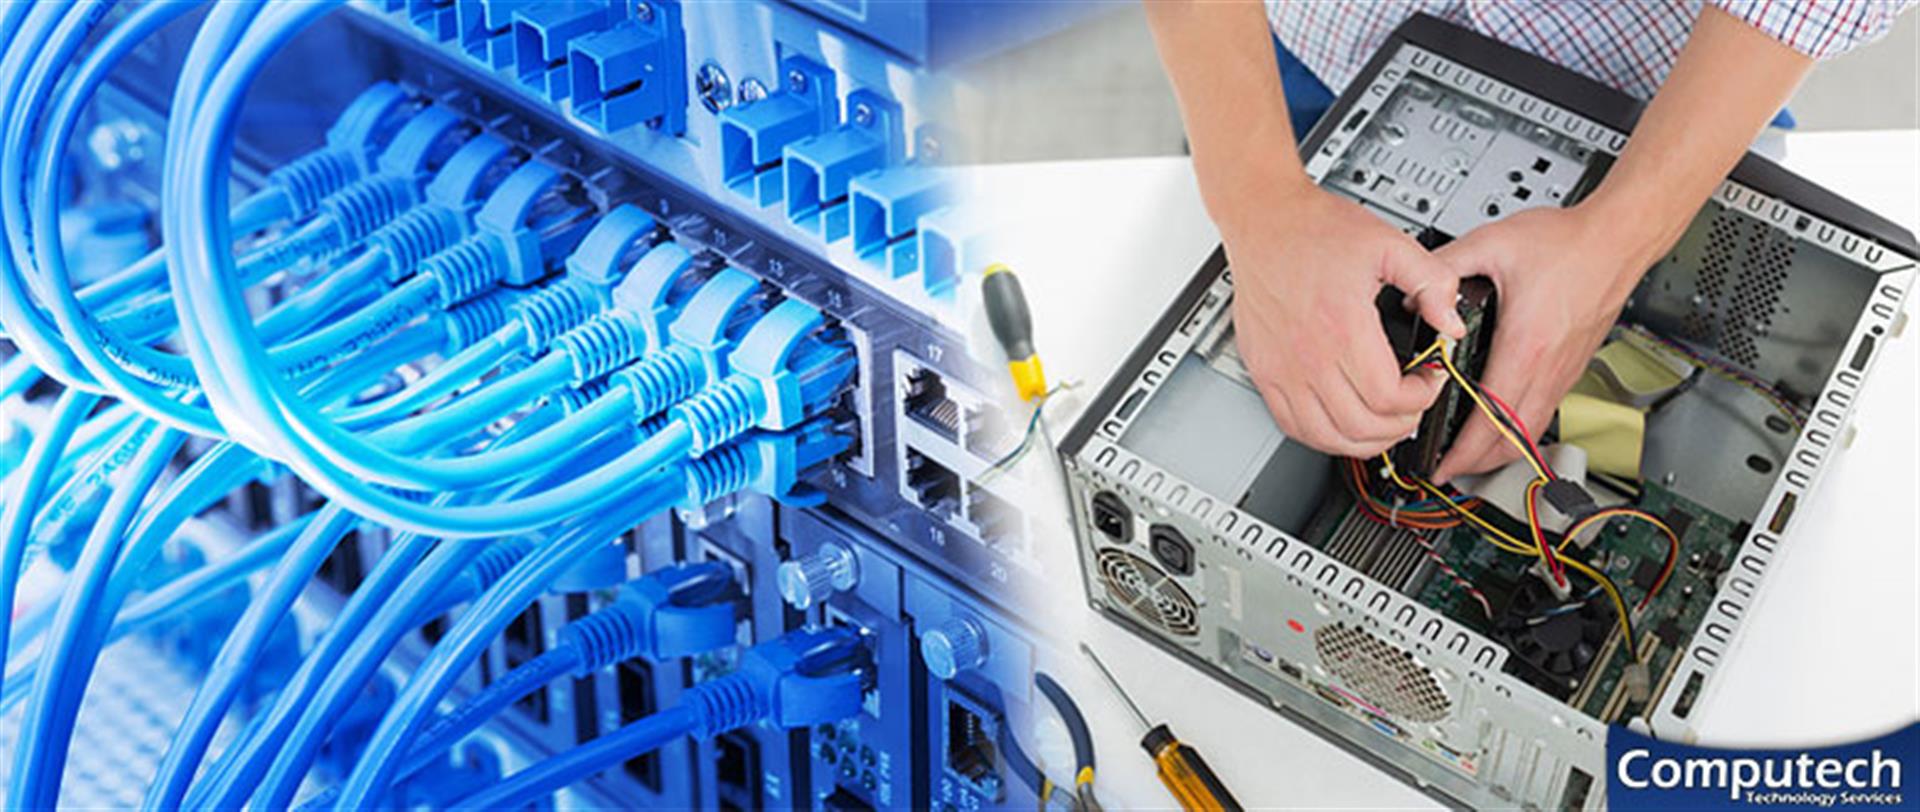 Smiths Station Alabama On-Site PC & Printer Repair, Network, Telecom & Data Cabling Services